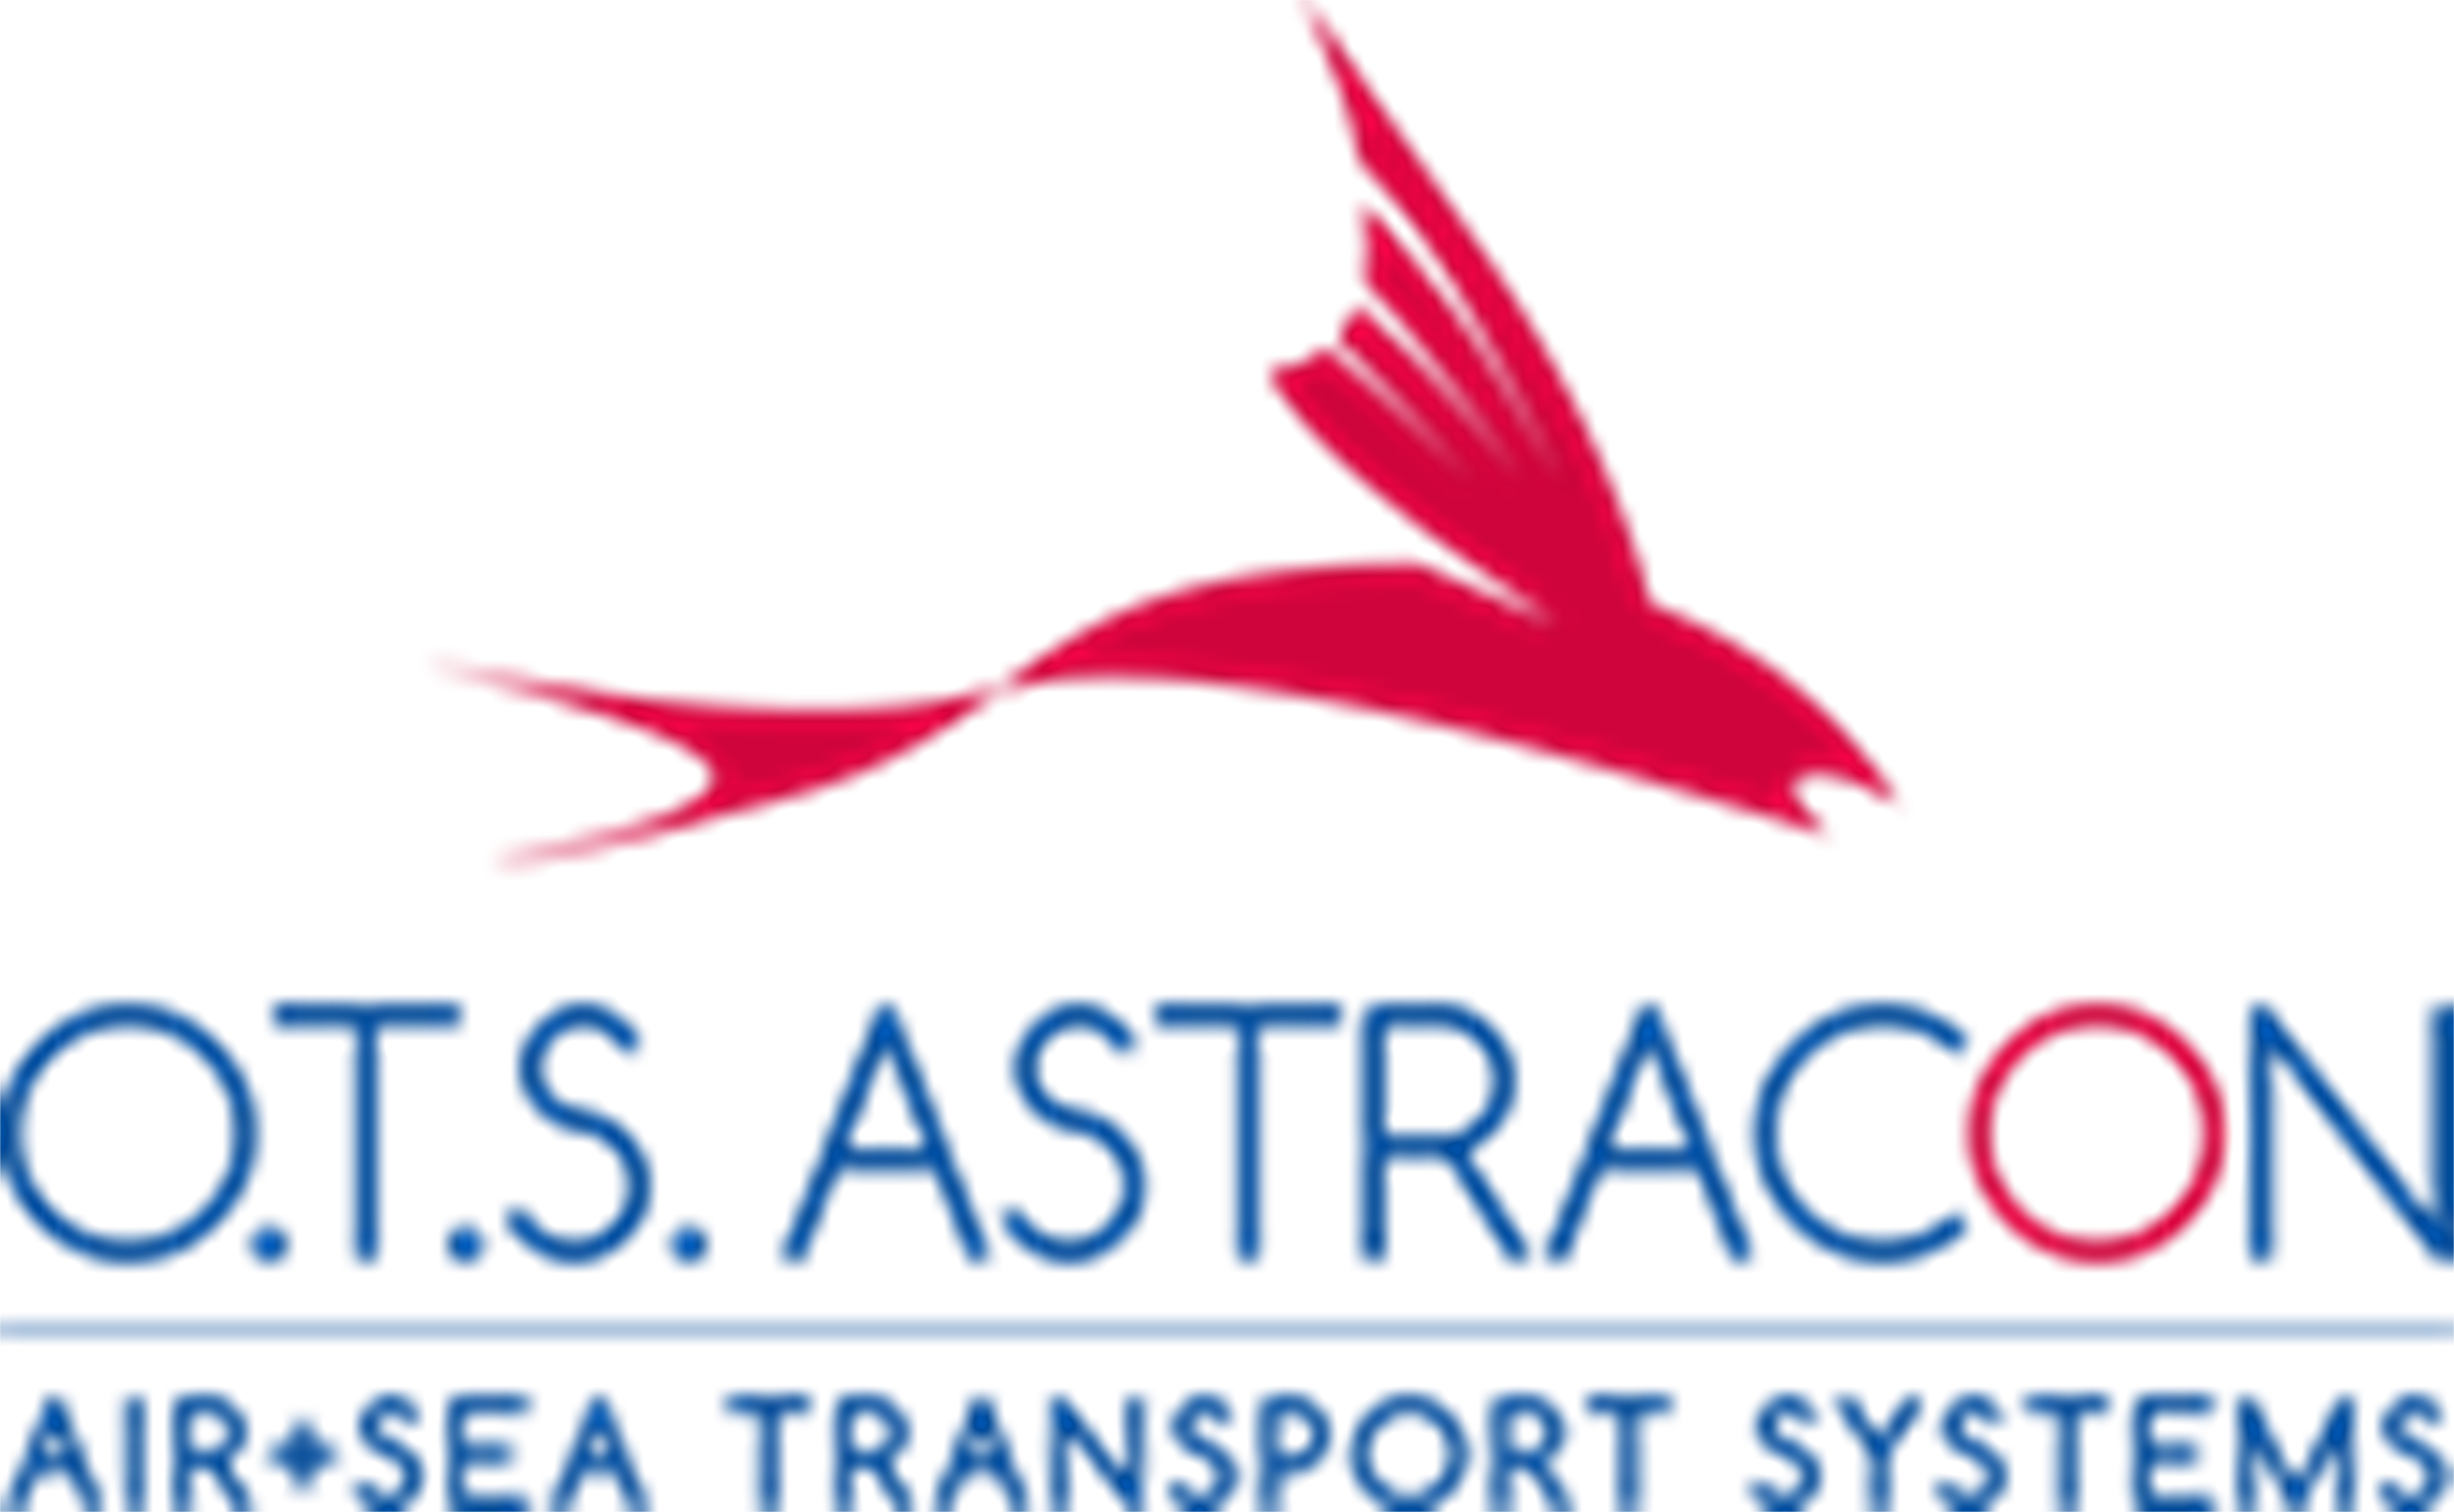 O.T.S. ASTRACON air sea transport systems GmbH